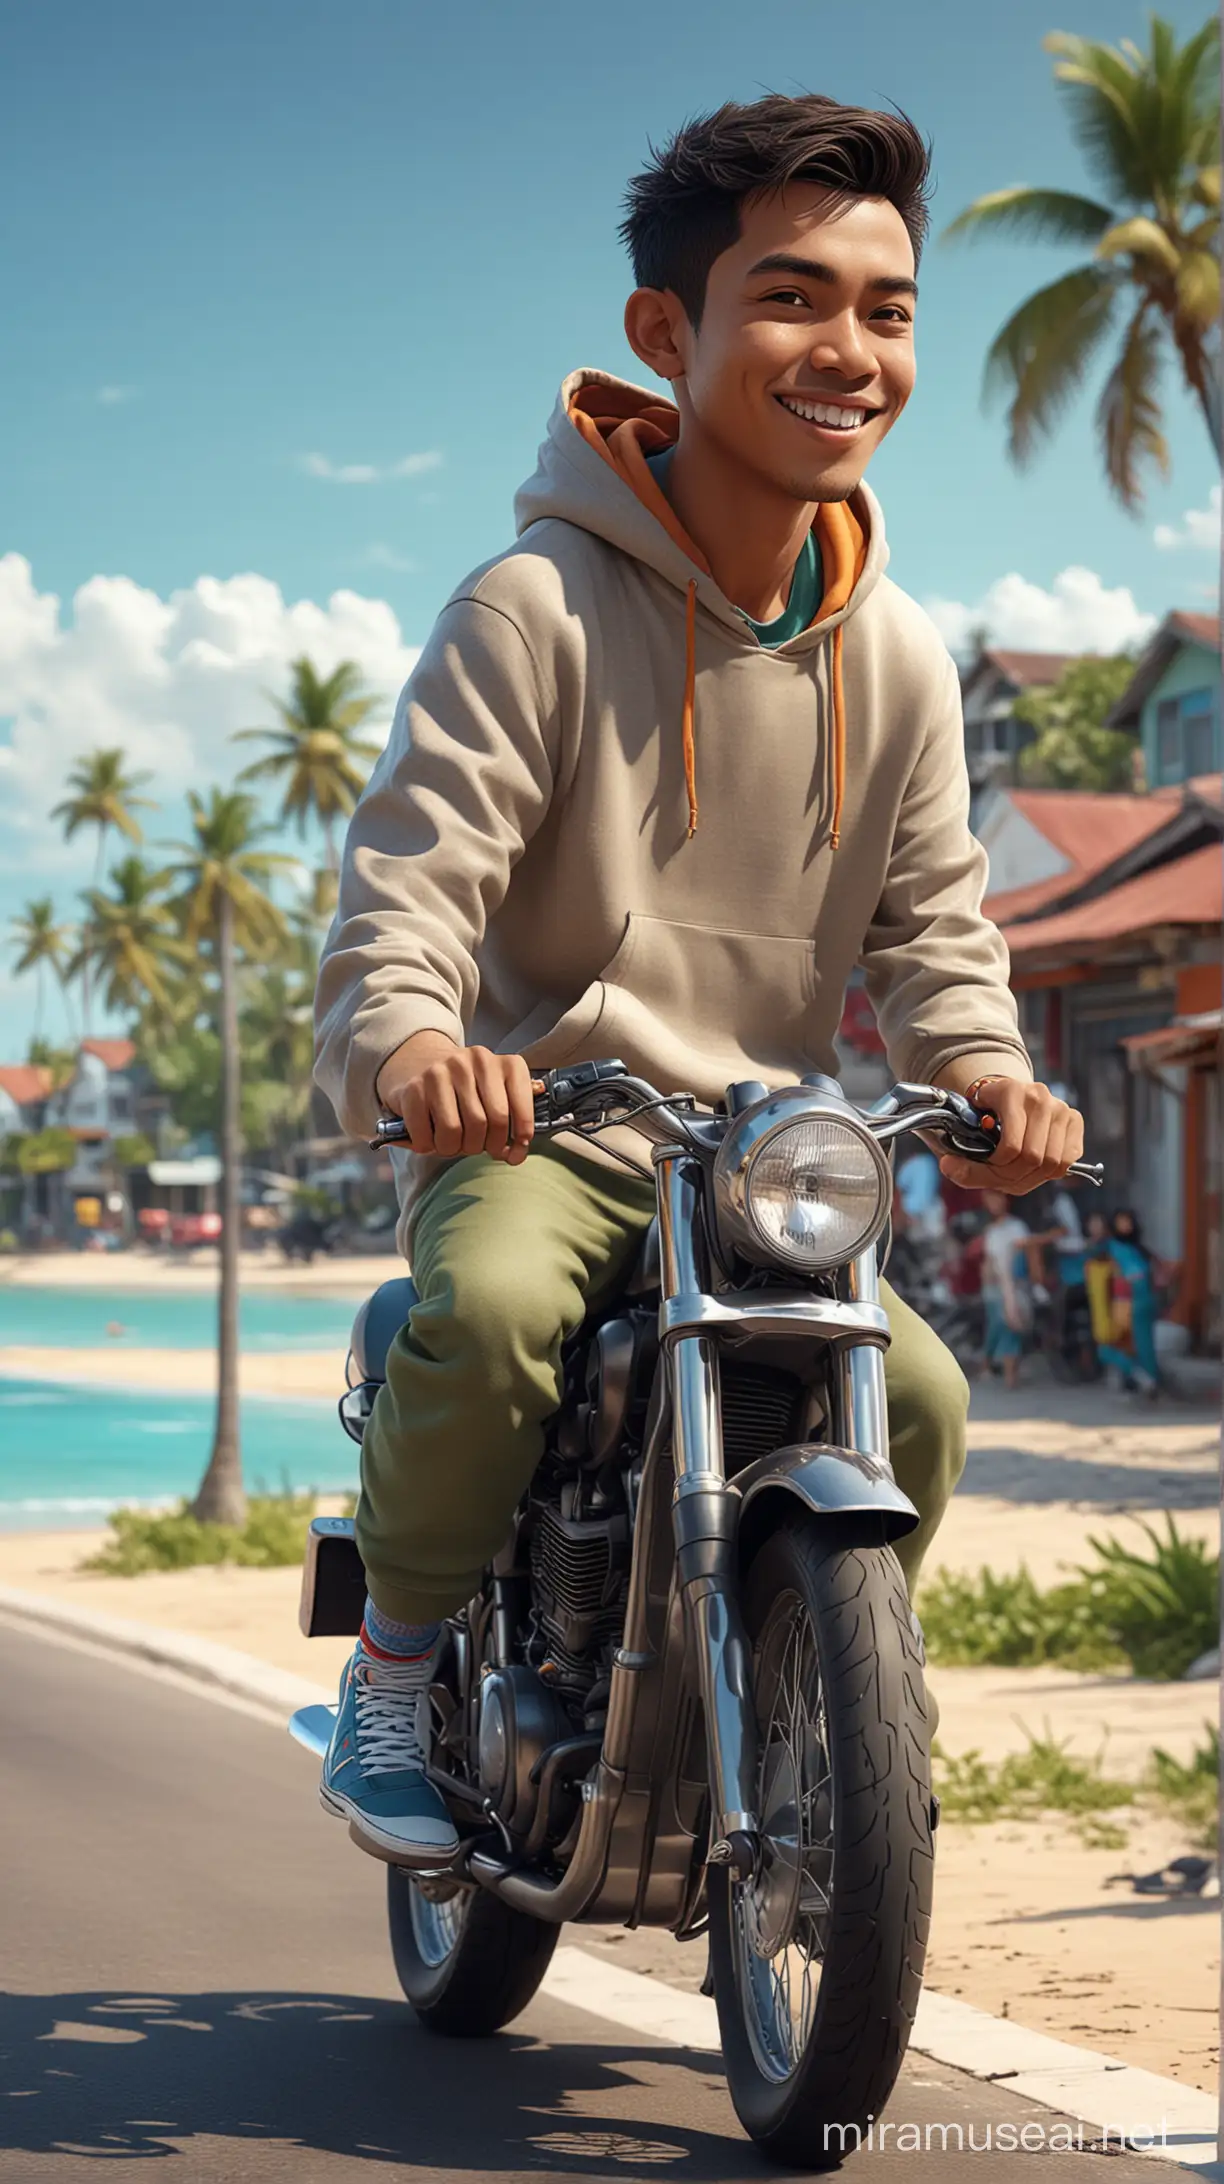 Stylish Indonesian Man Riding Motorcycle by Vibrant Beach